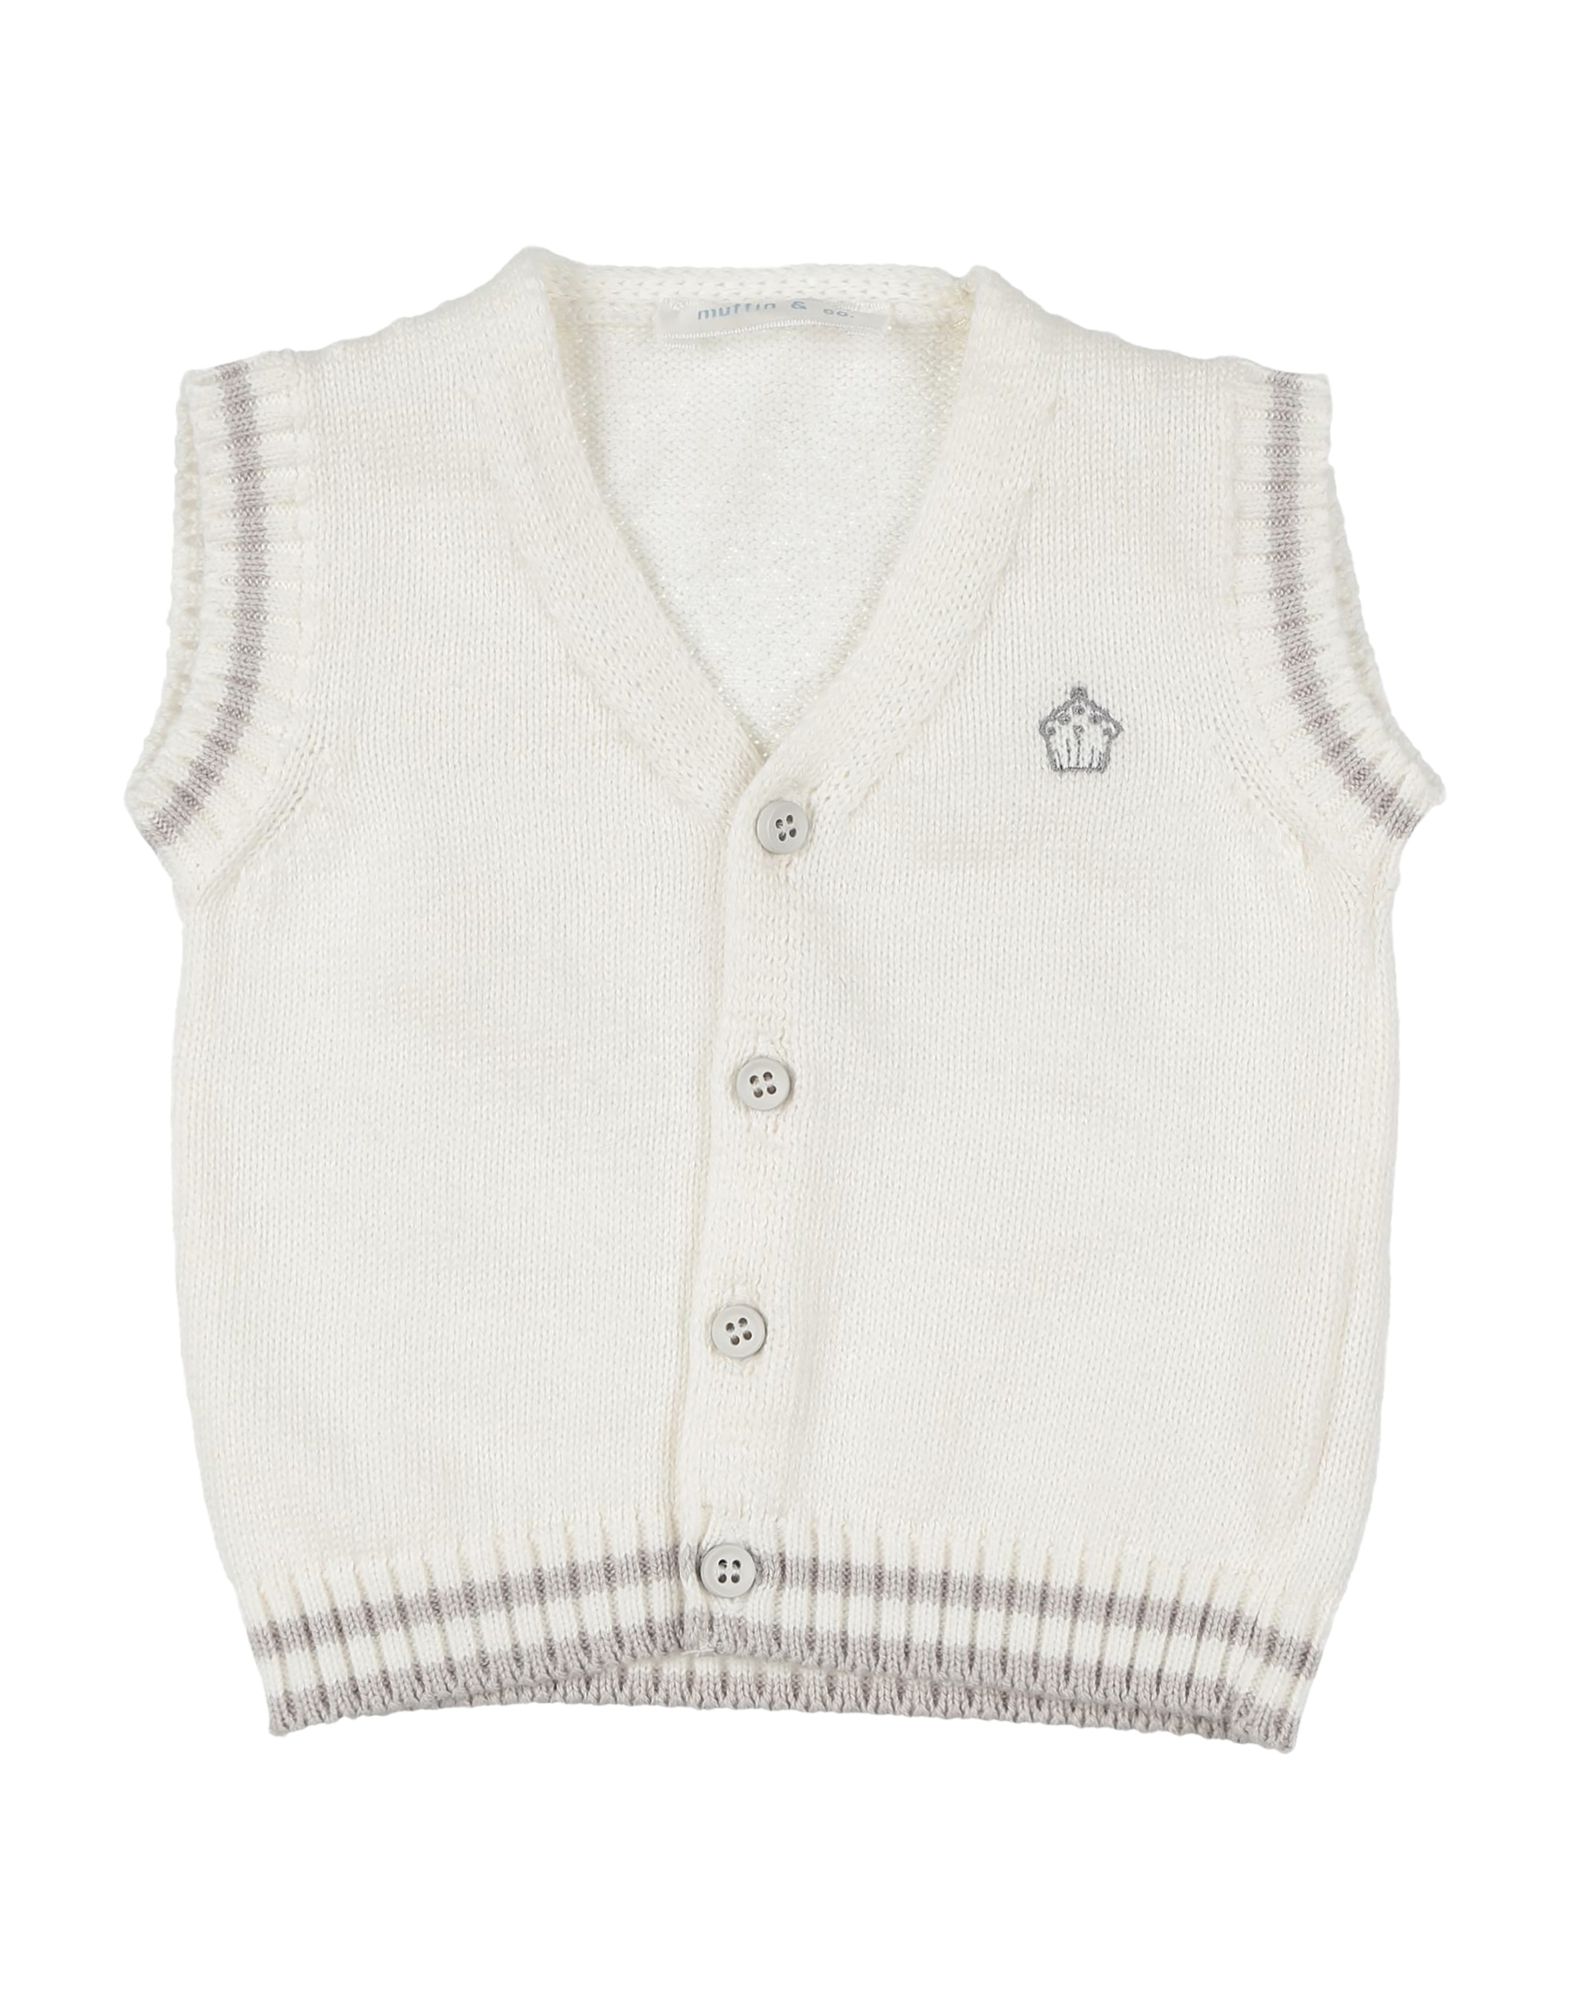 Muffin & Co. Kids' Cardigans In White